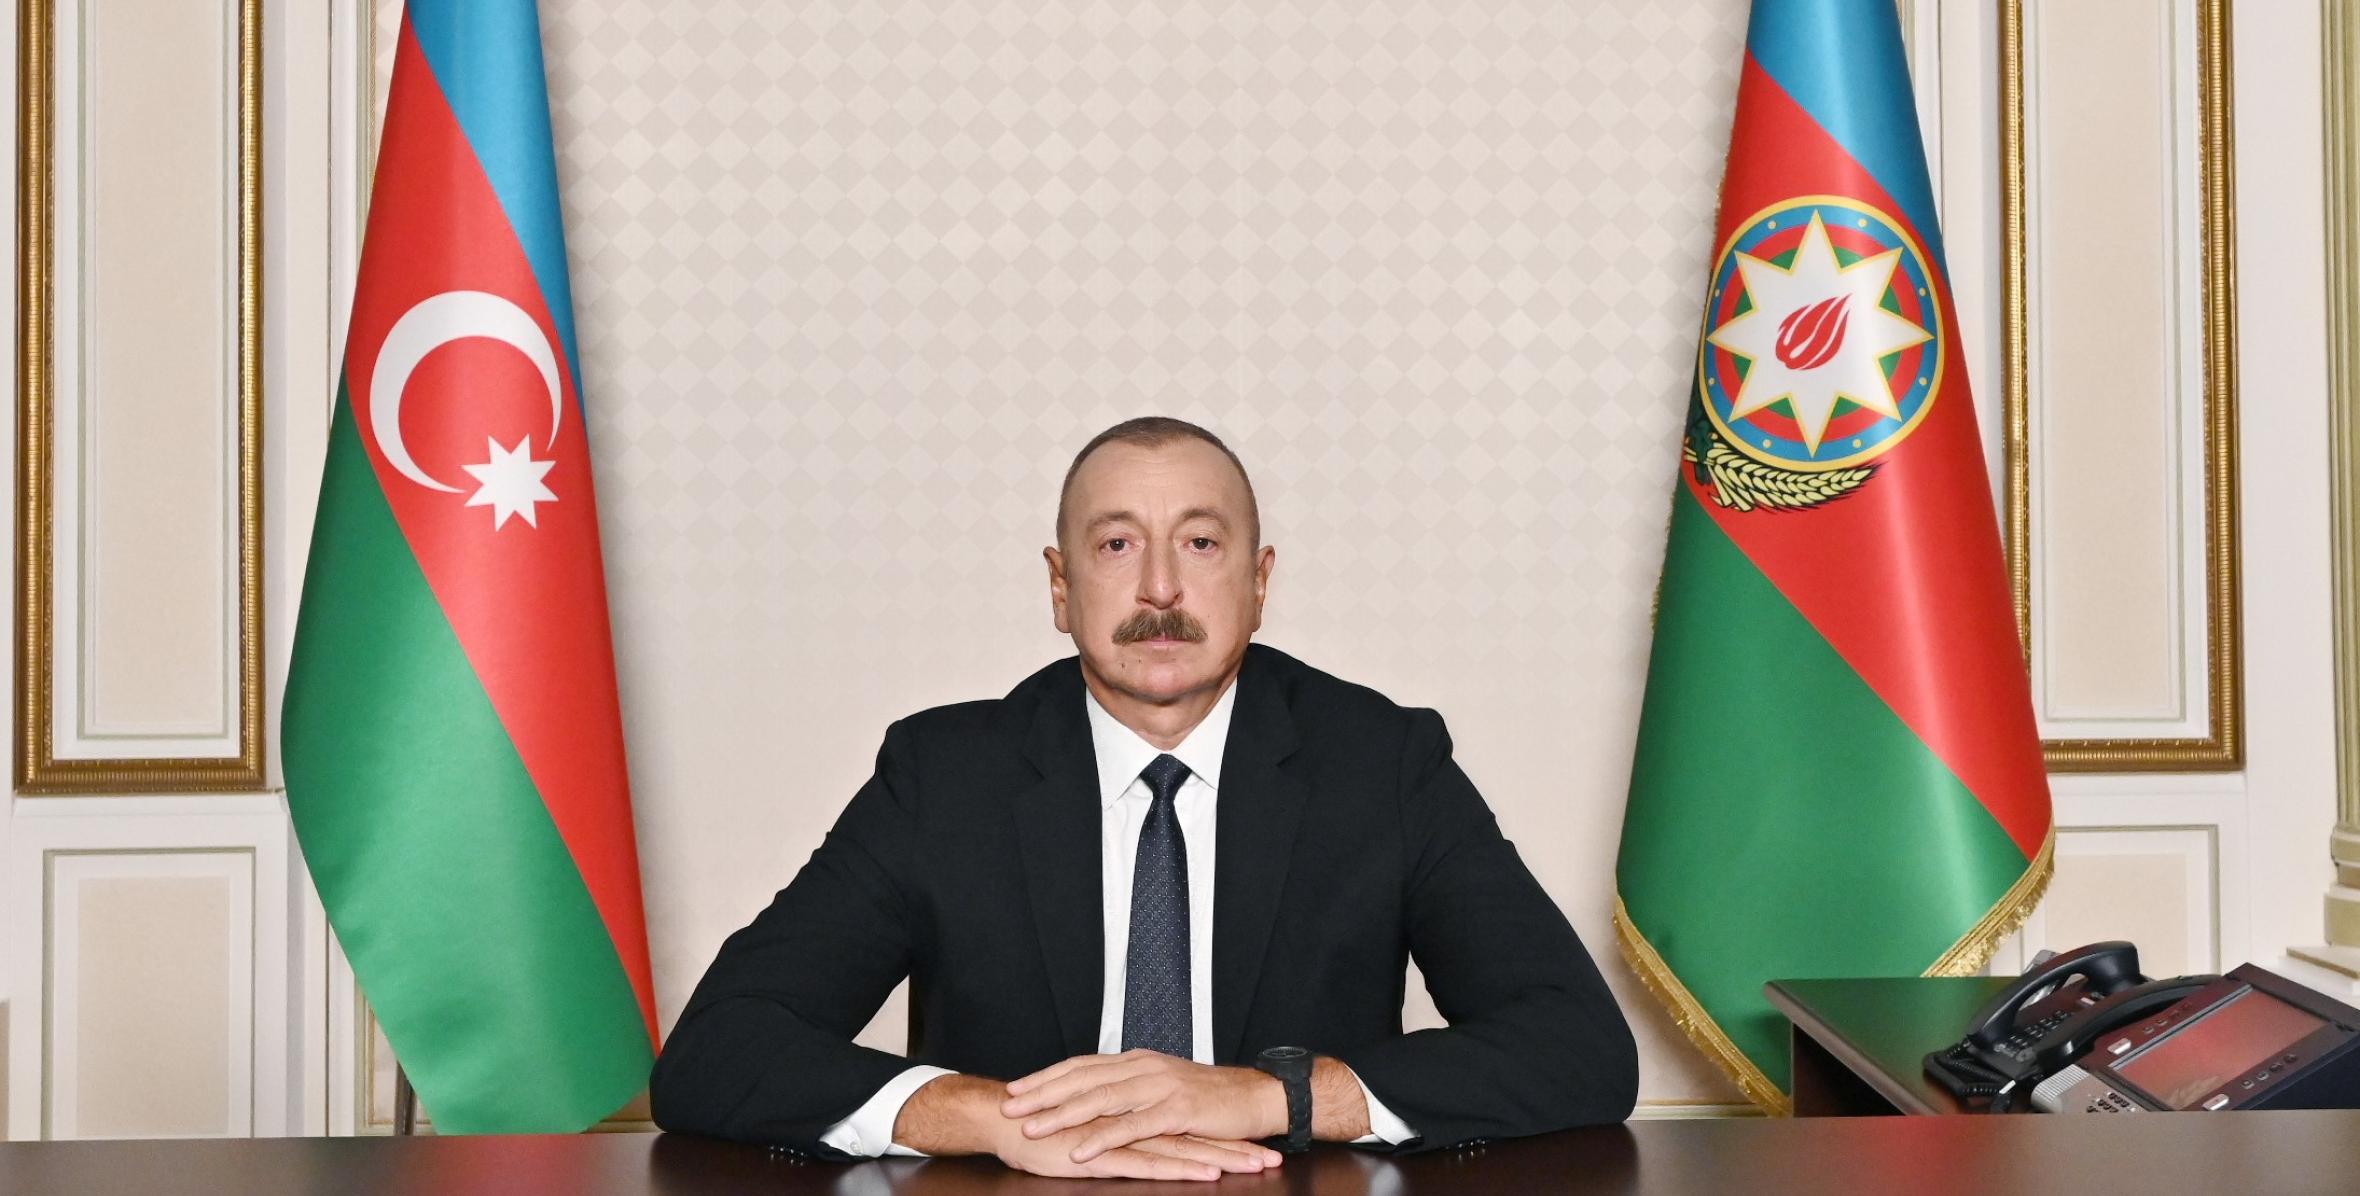 Victorious Commander-in-Chief, President Ilham Aliyev addressed the nation on the occasion of the Remembrance Day